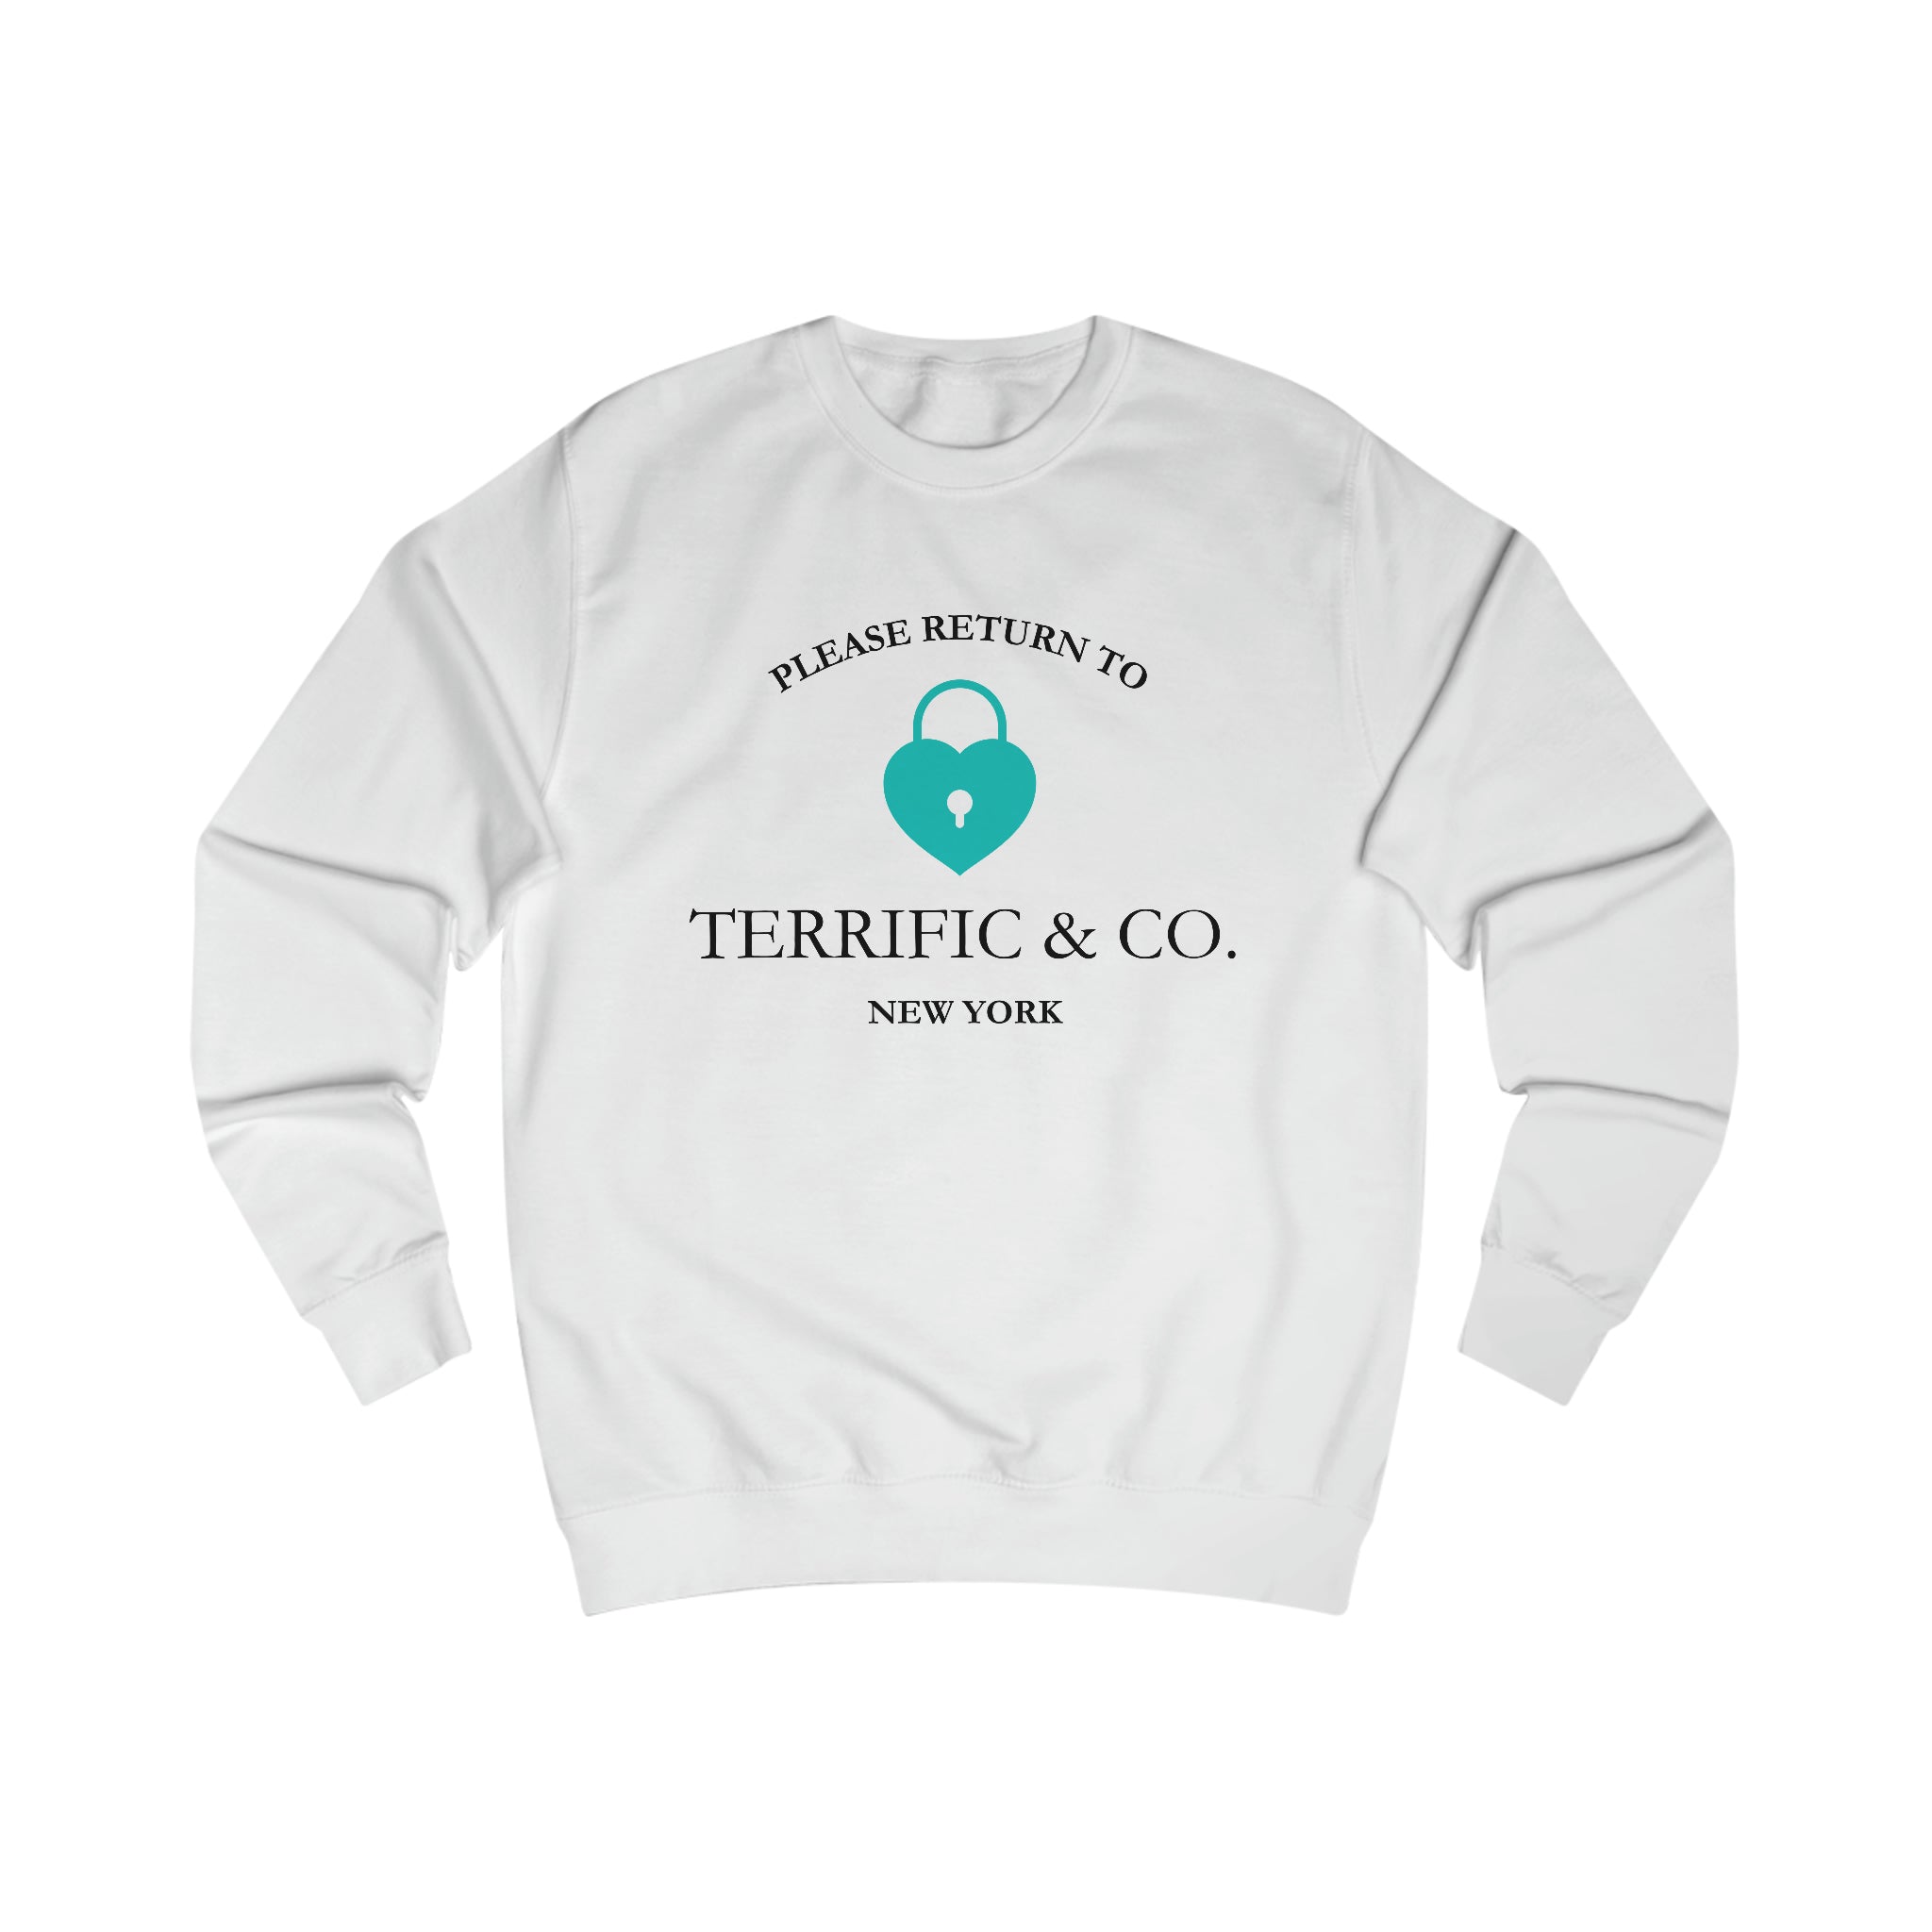 Please Return To Terrific and Co. (Heart Lock) Designer inspired Relaxed Fit Unisex Sweatshirt Sweatshirt Arctic-White-2XL The Middle Aged Groove